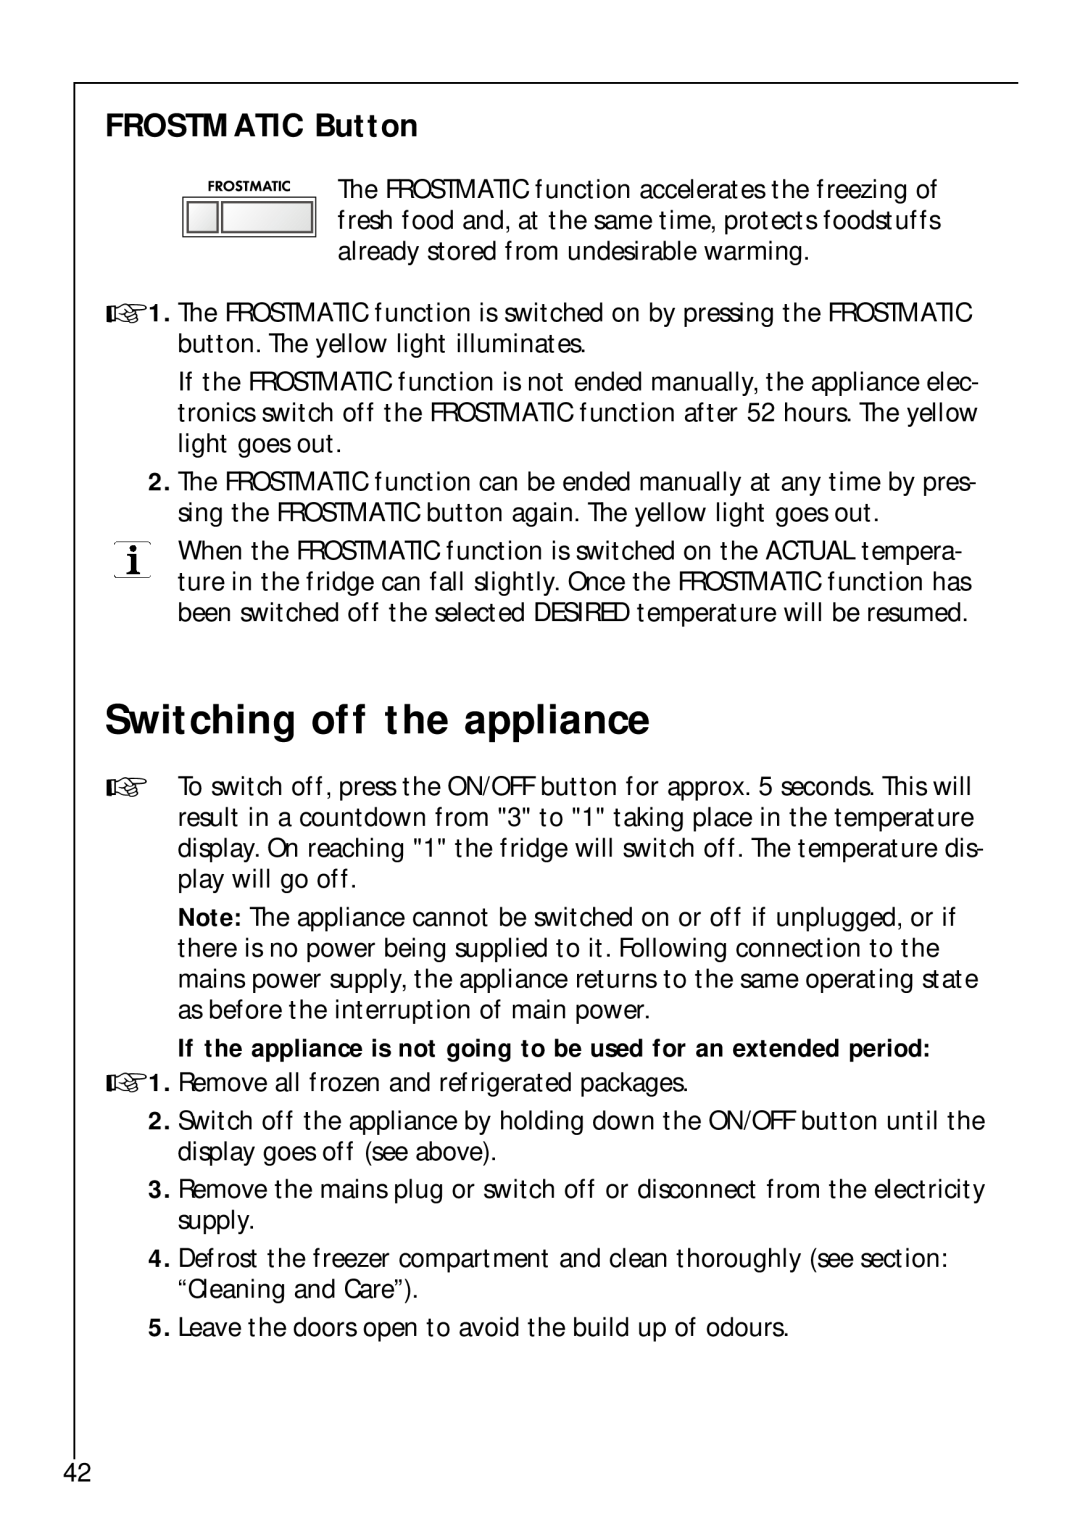 Electrolux Z 9 18 42-4 I user manual Switching off the appliance, FROSTMATIC Button 